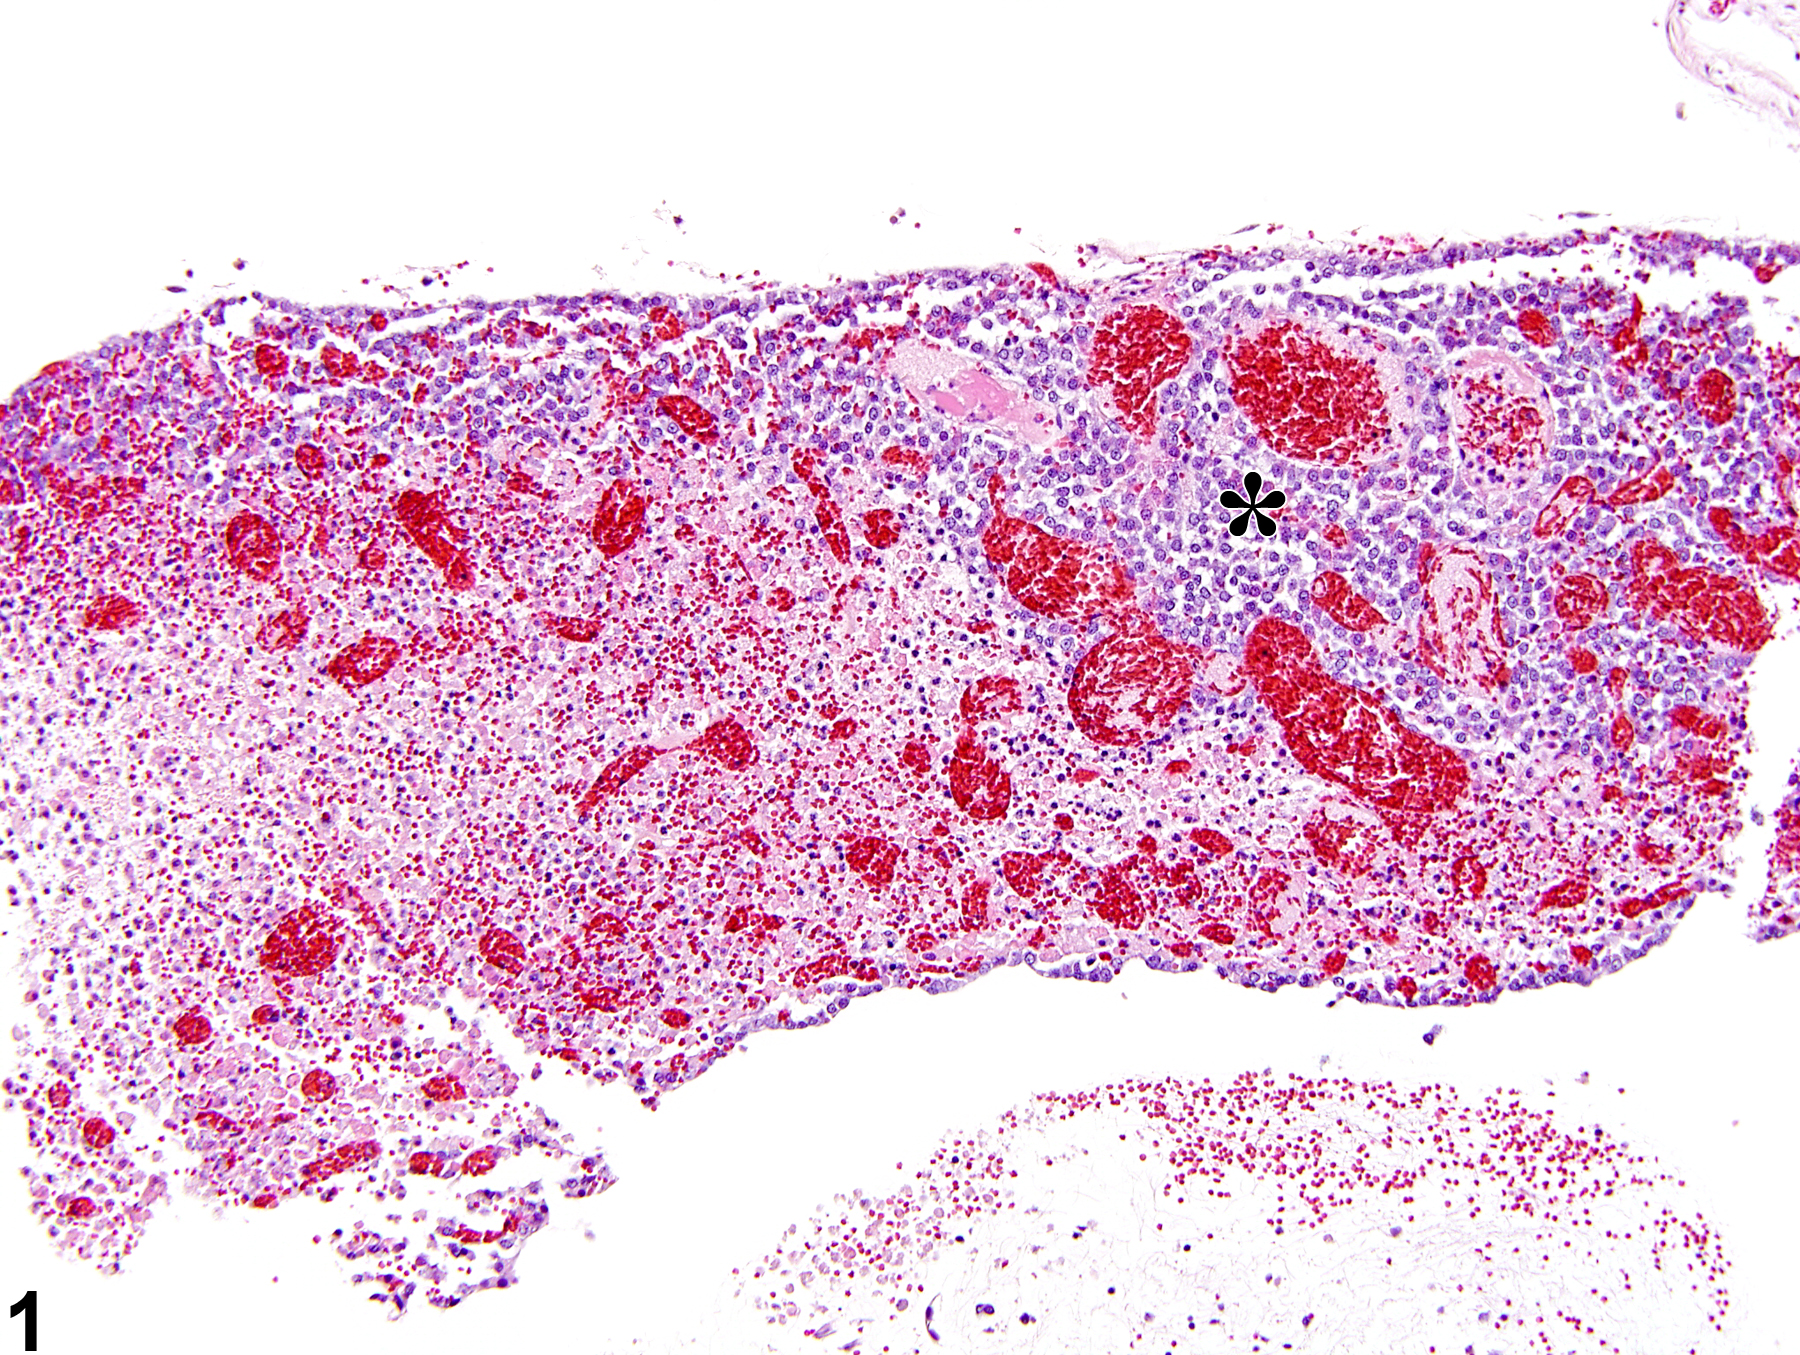 Image of pars distalis necrosis in the pituitary gland from a female F344/N rat in a subchronic study